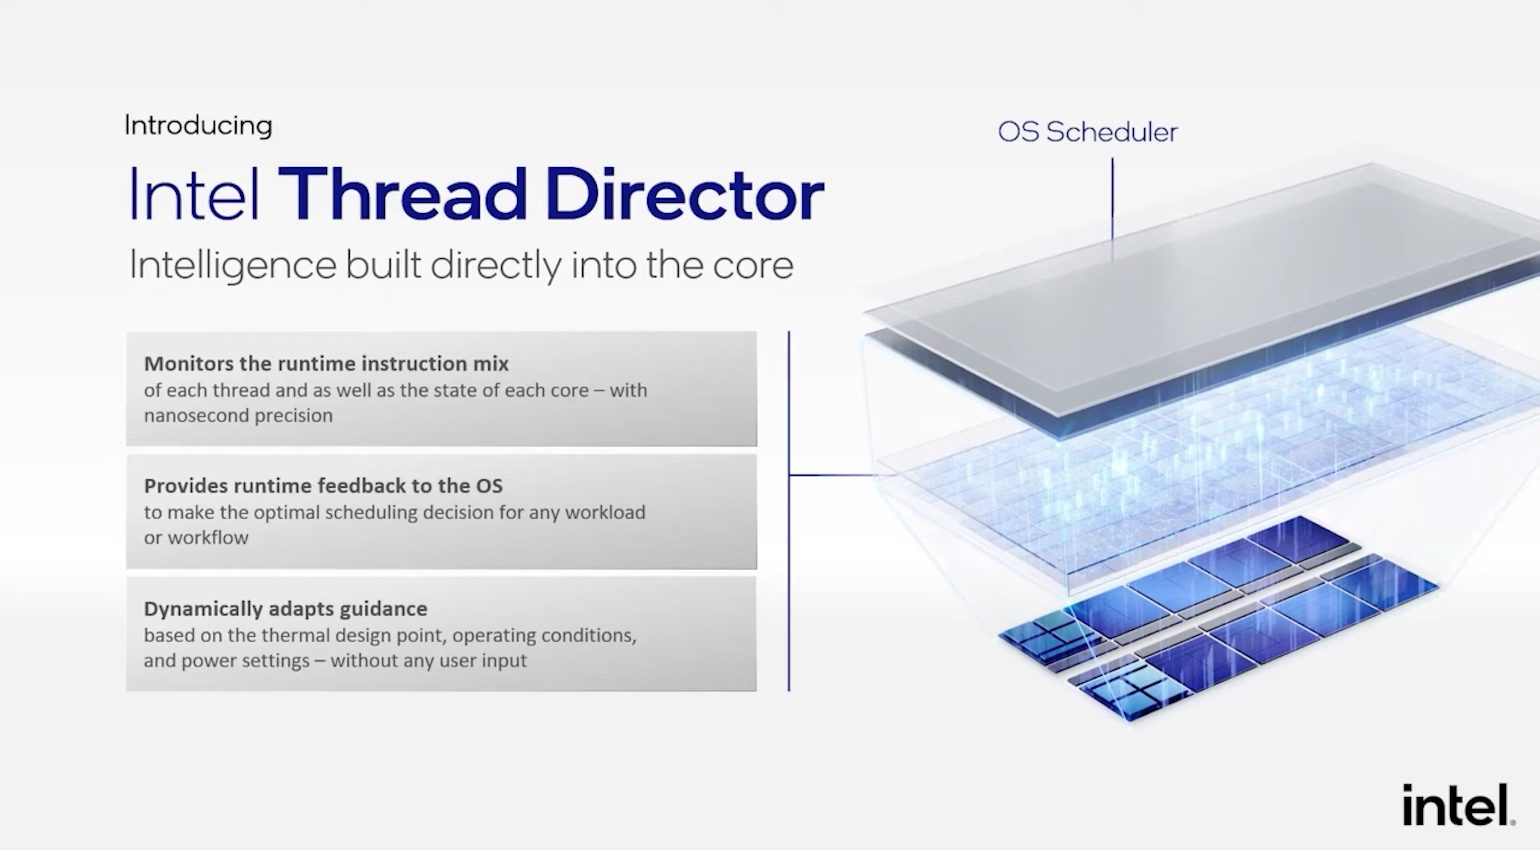 Thread Director manages the hybrid-core CPU architecture.